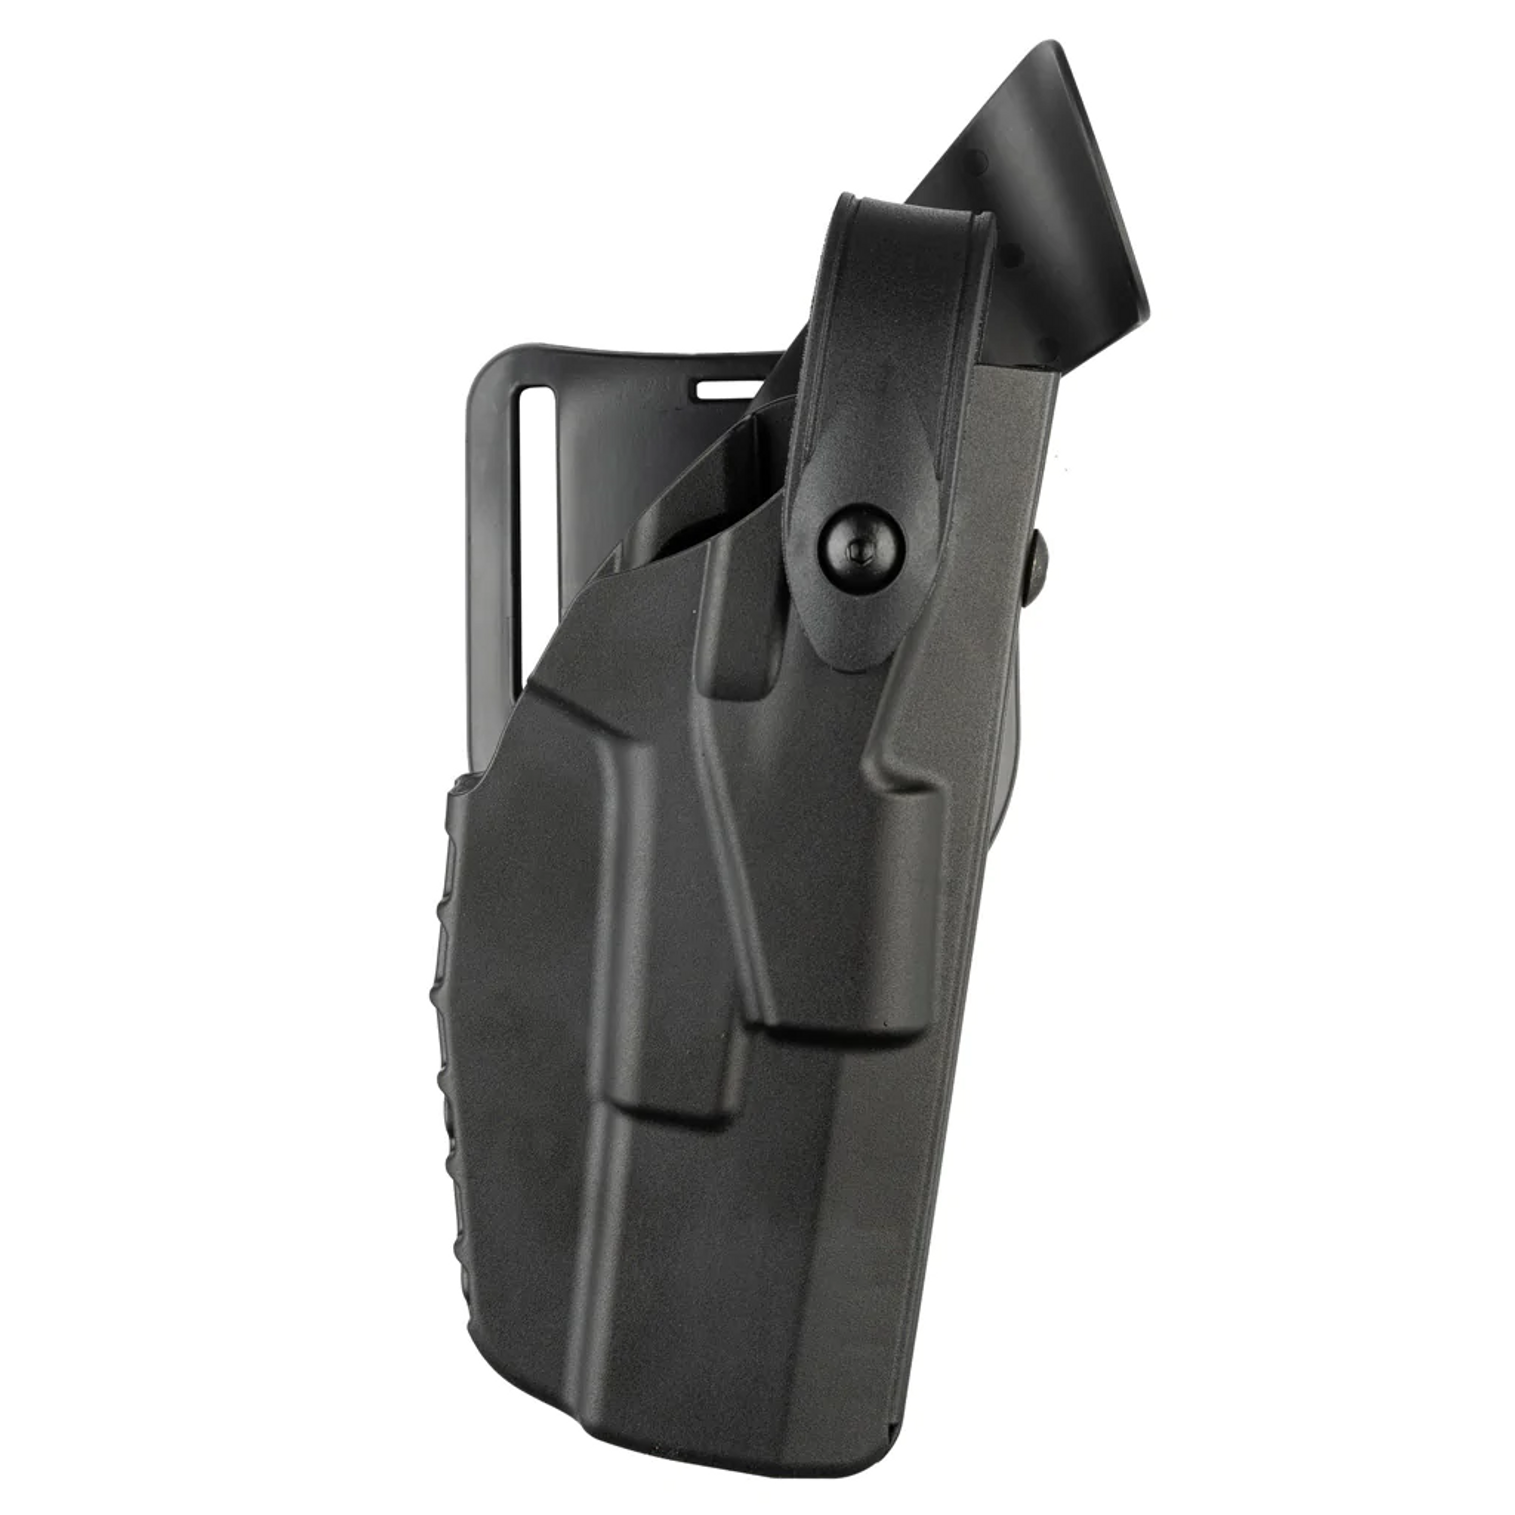 Model 7280 7ts Sls Mid-ride, Level Ii Retention Duty Holster For Smith & Wesson M&p 9 - KR7280-219-412